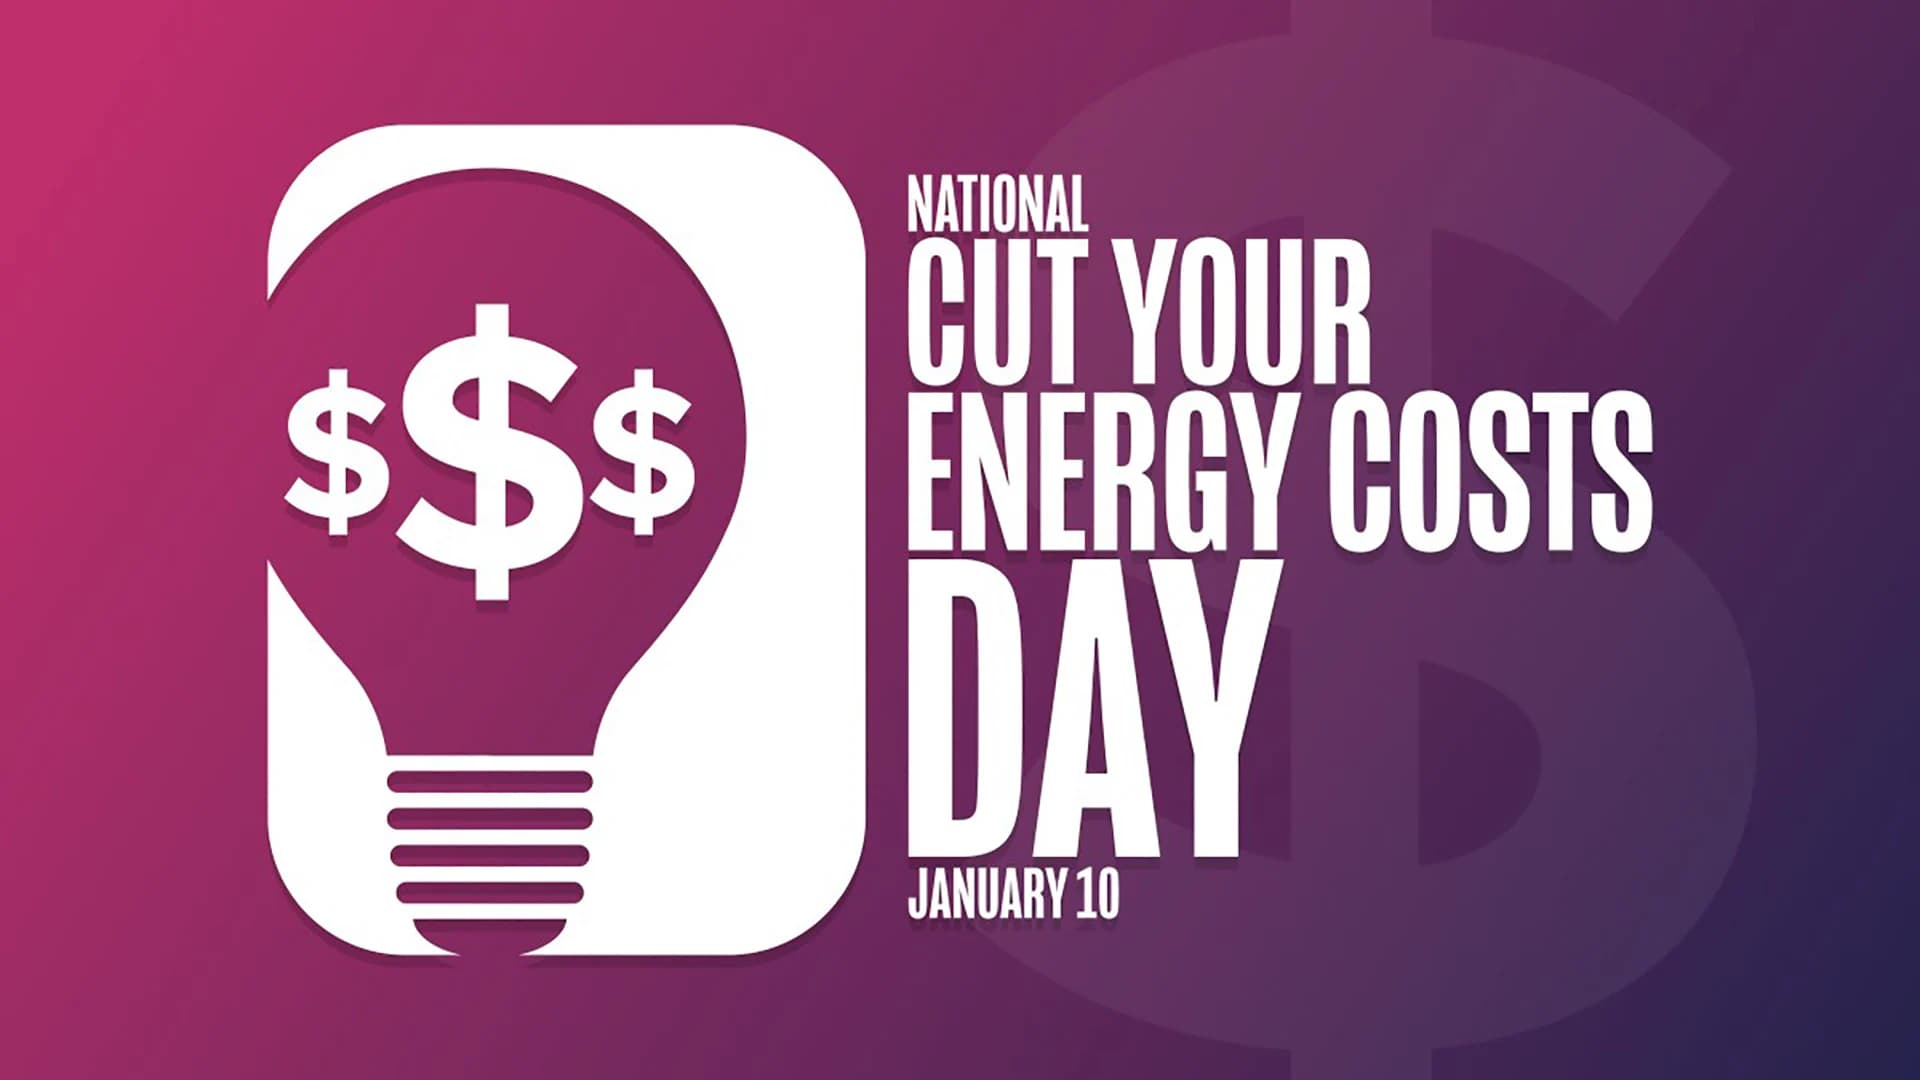 Money and energy saving tips for the new year